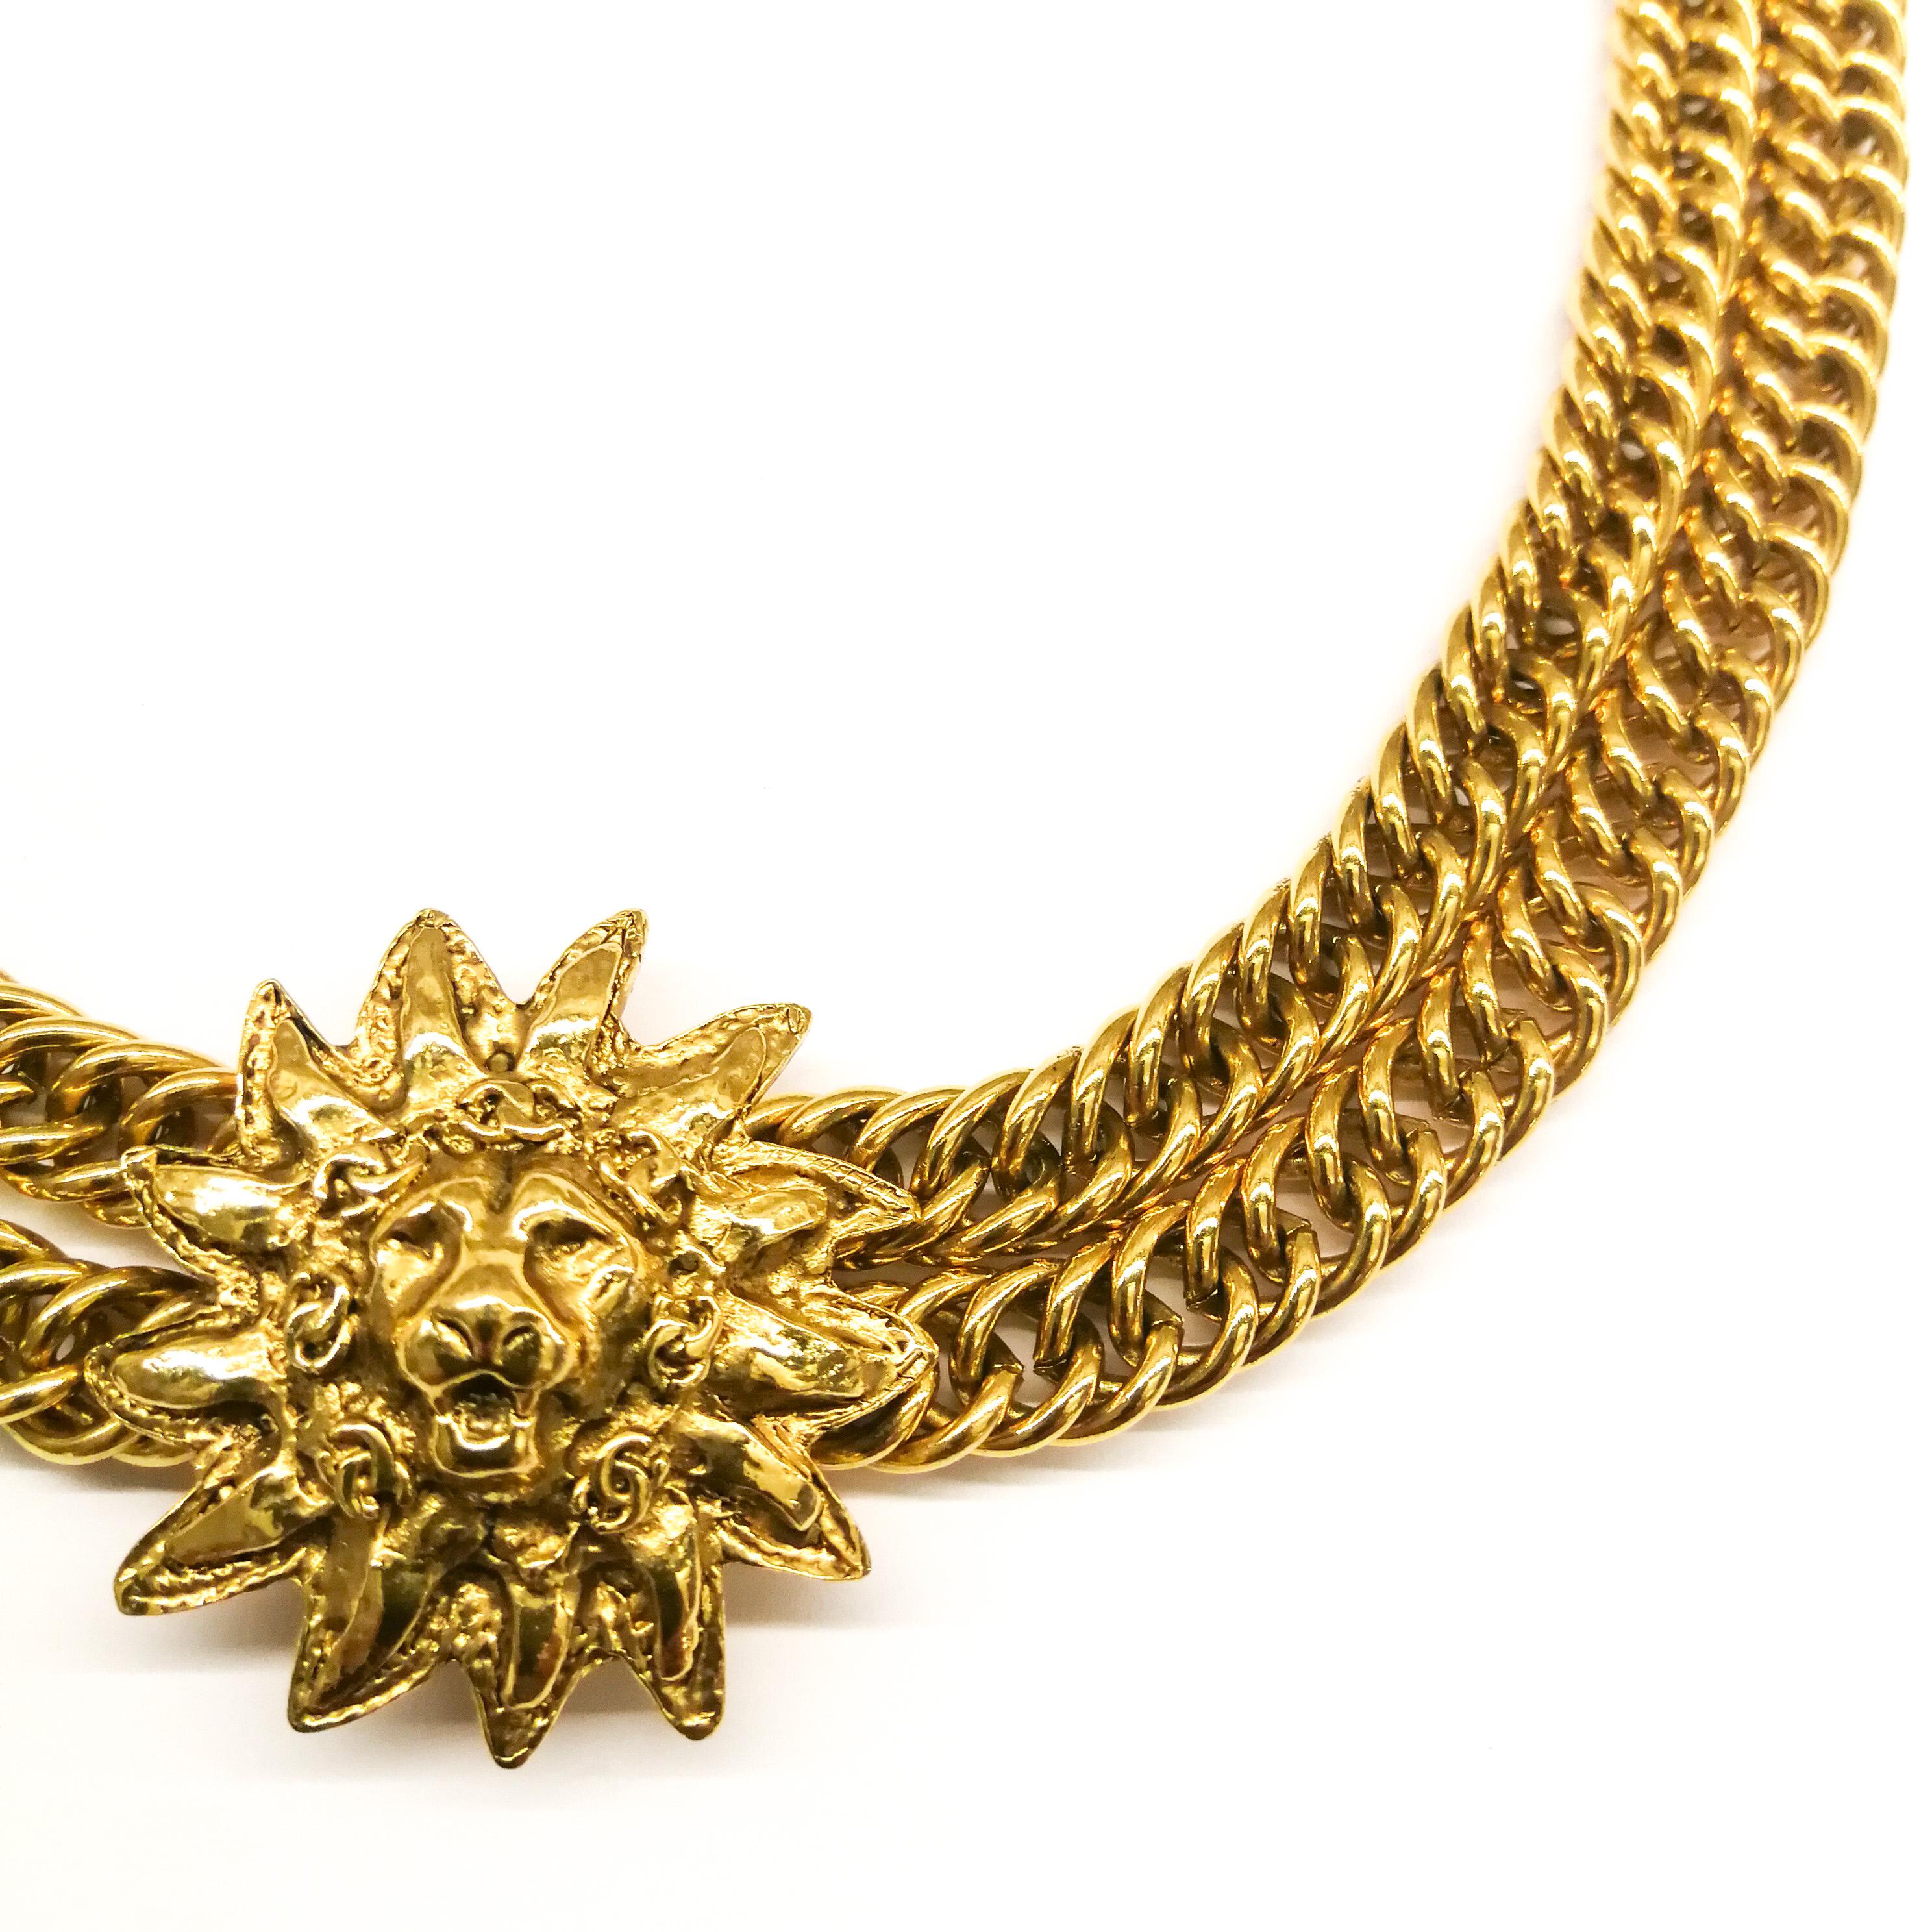 Gilt double row chain necklace, with iconic 'lion head' motif , Chanel, 1980s 1